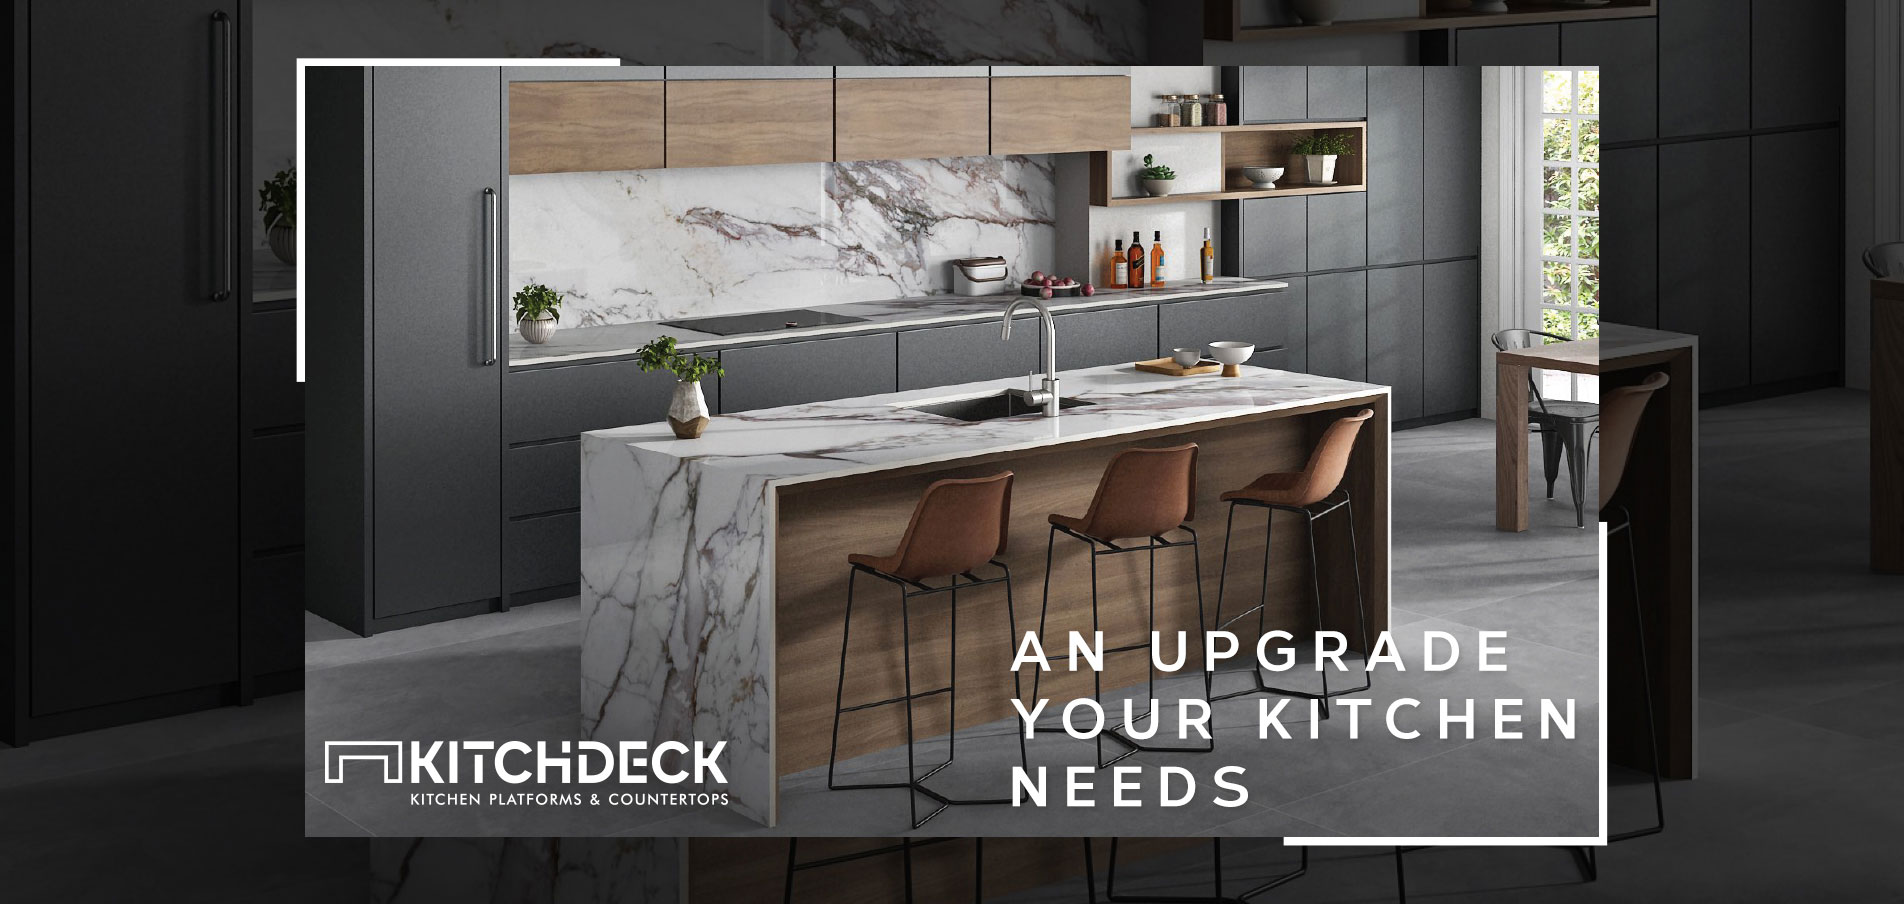 Kitchdeck An upgrade to your kitchen needs